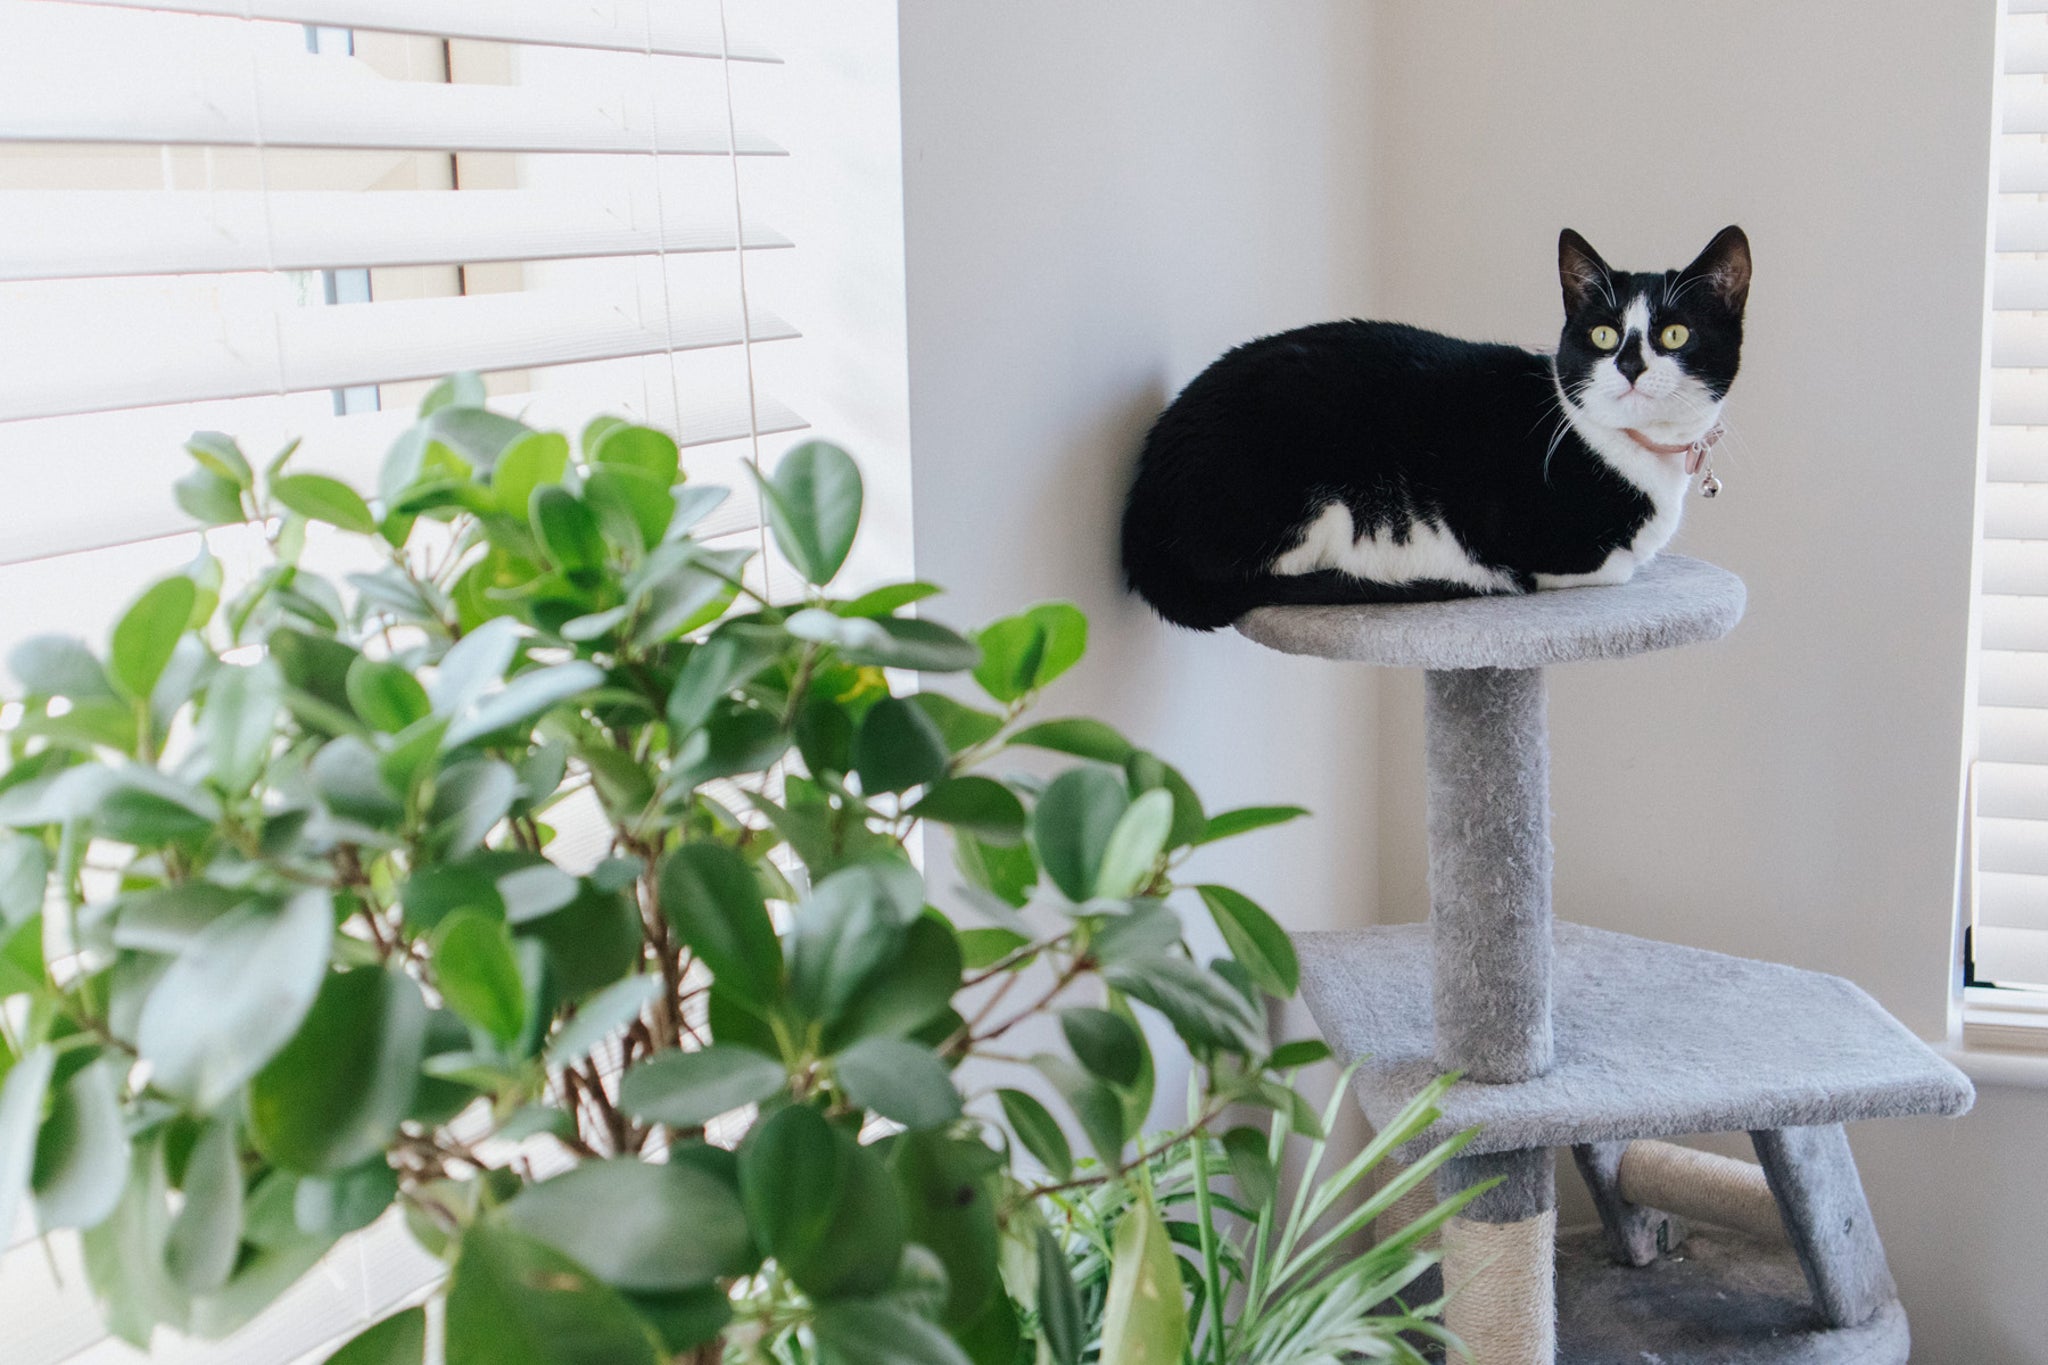 081_cat_on_stool_with_plant.jpg